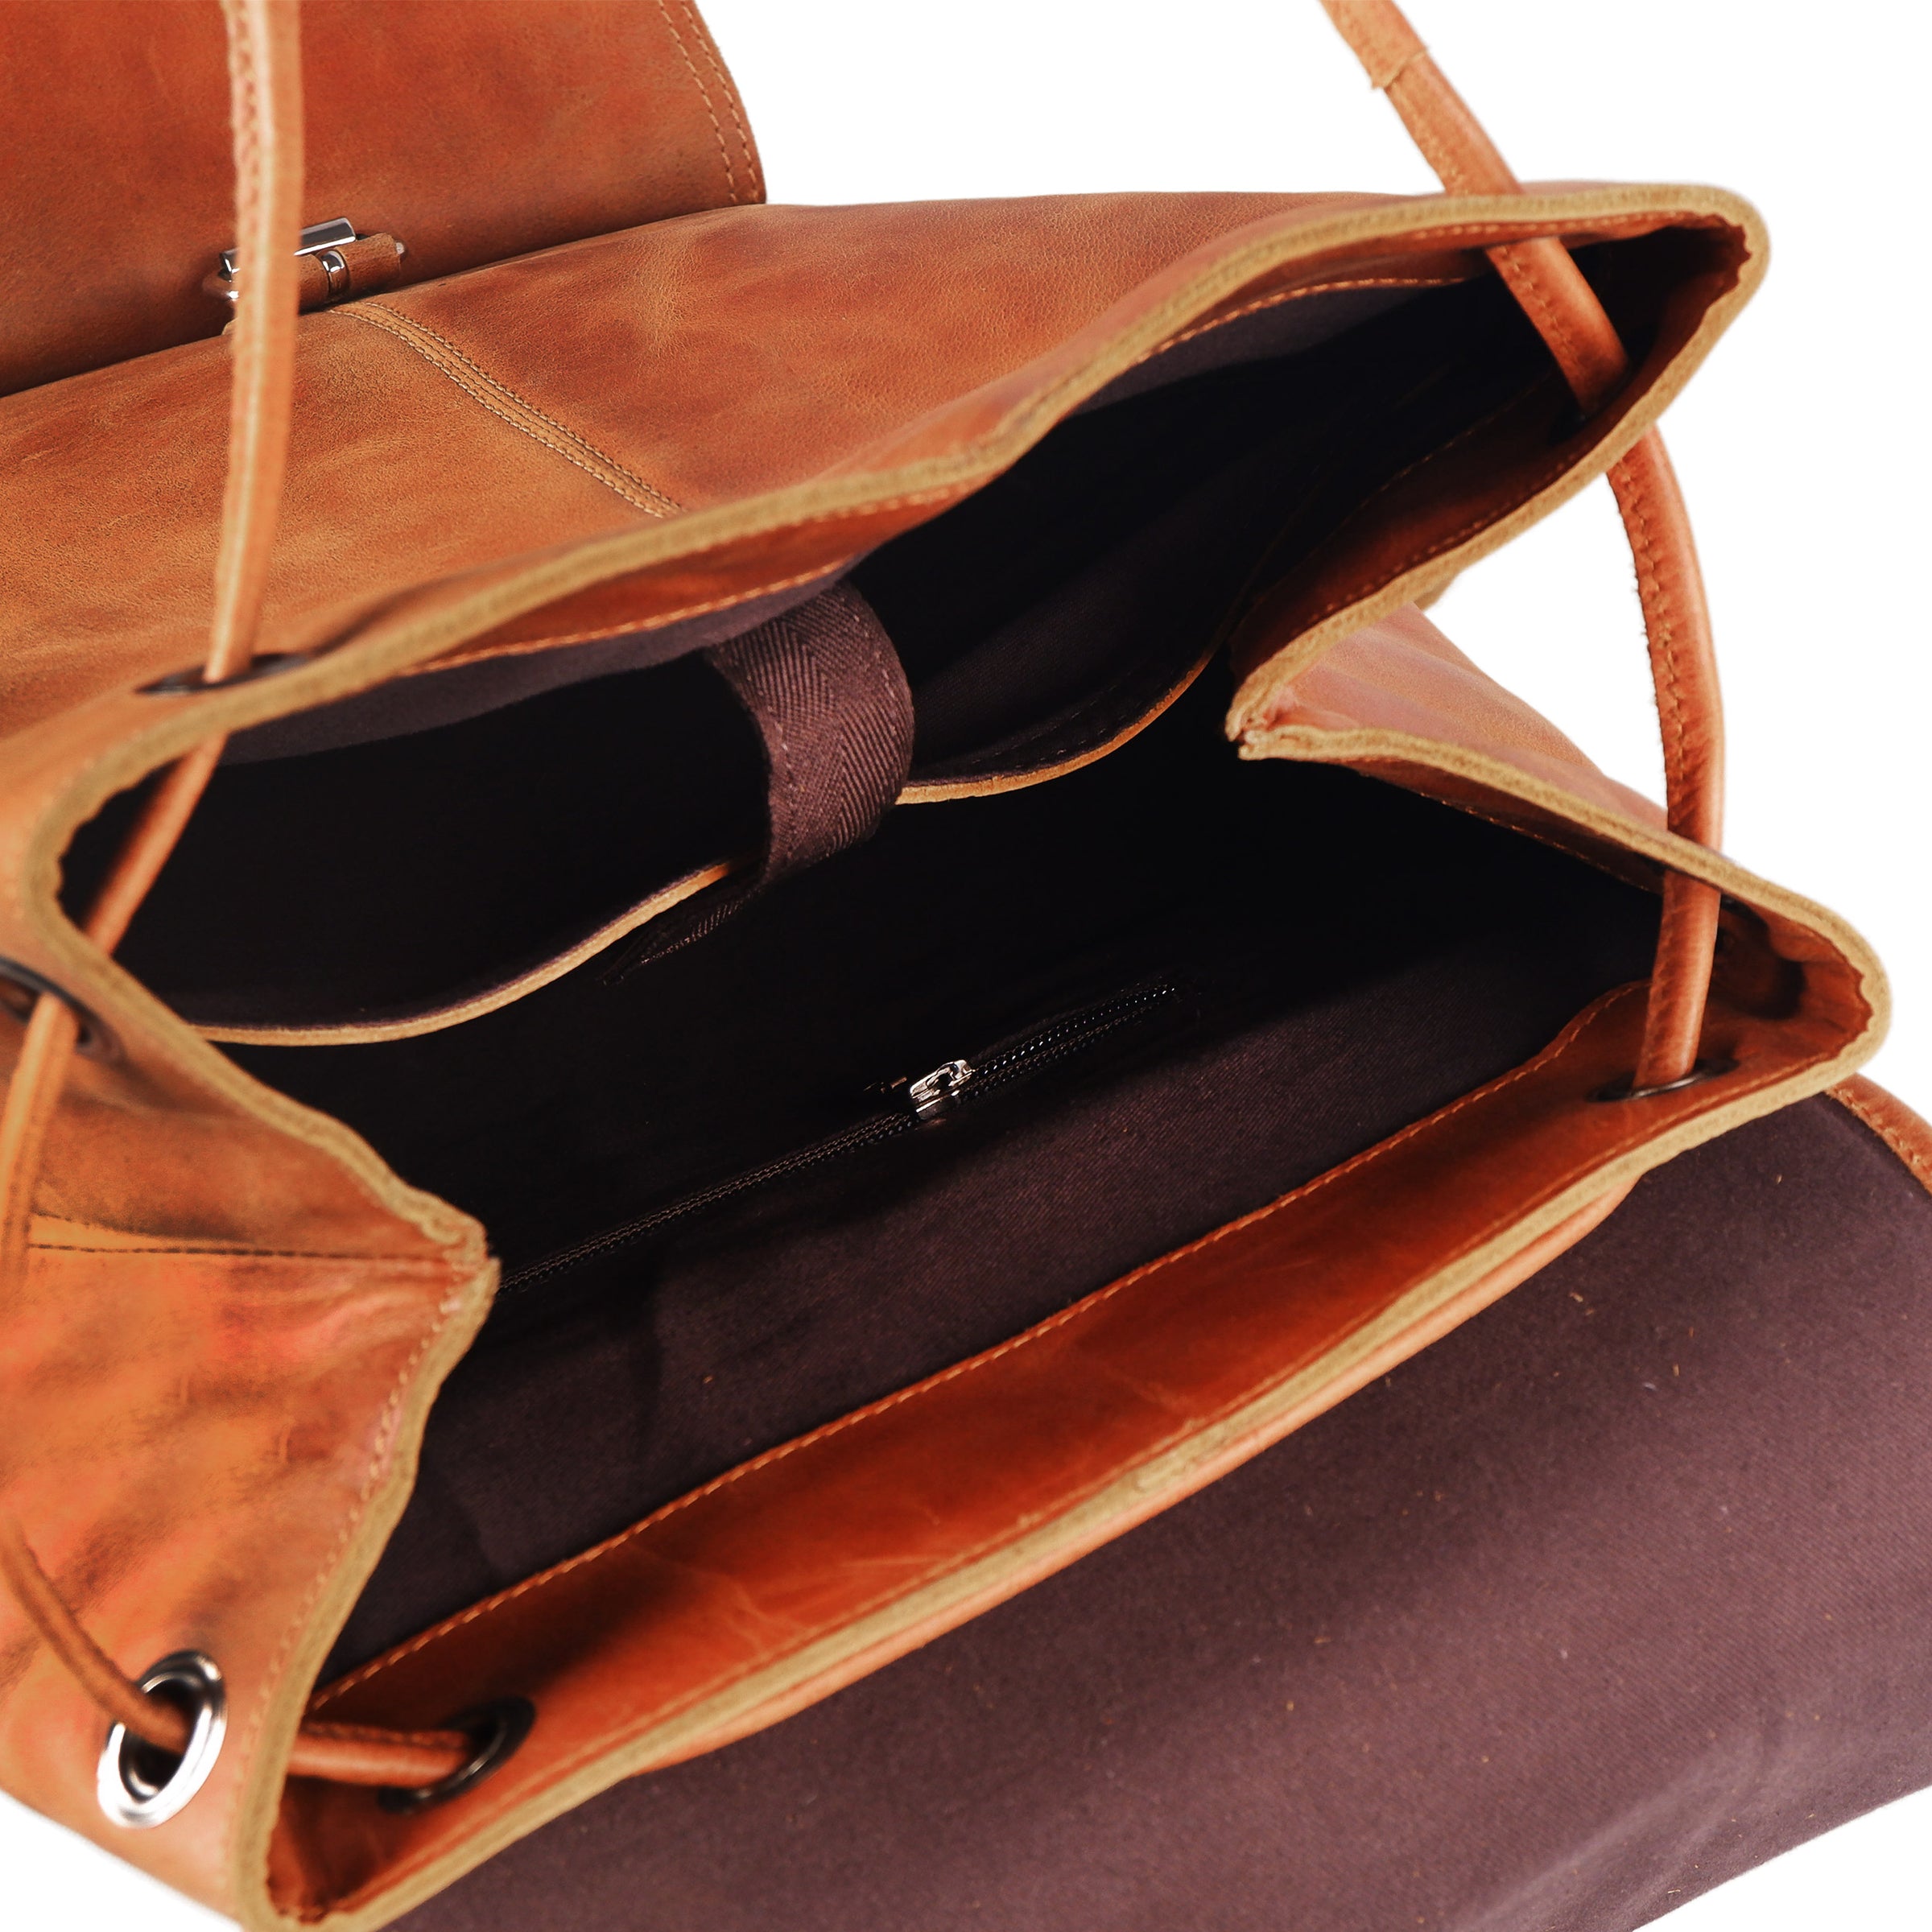 inside view of leather backpack